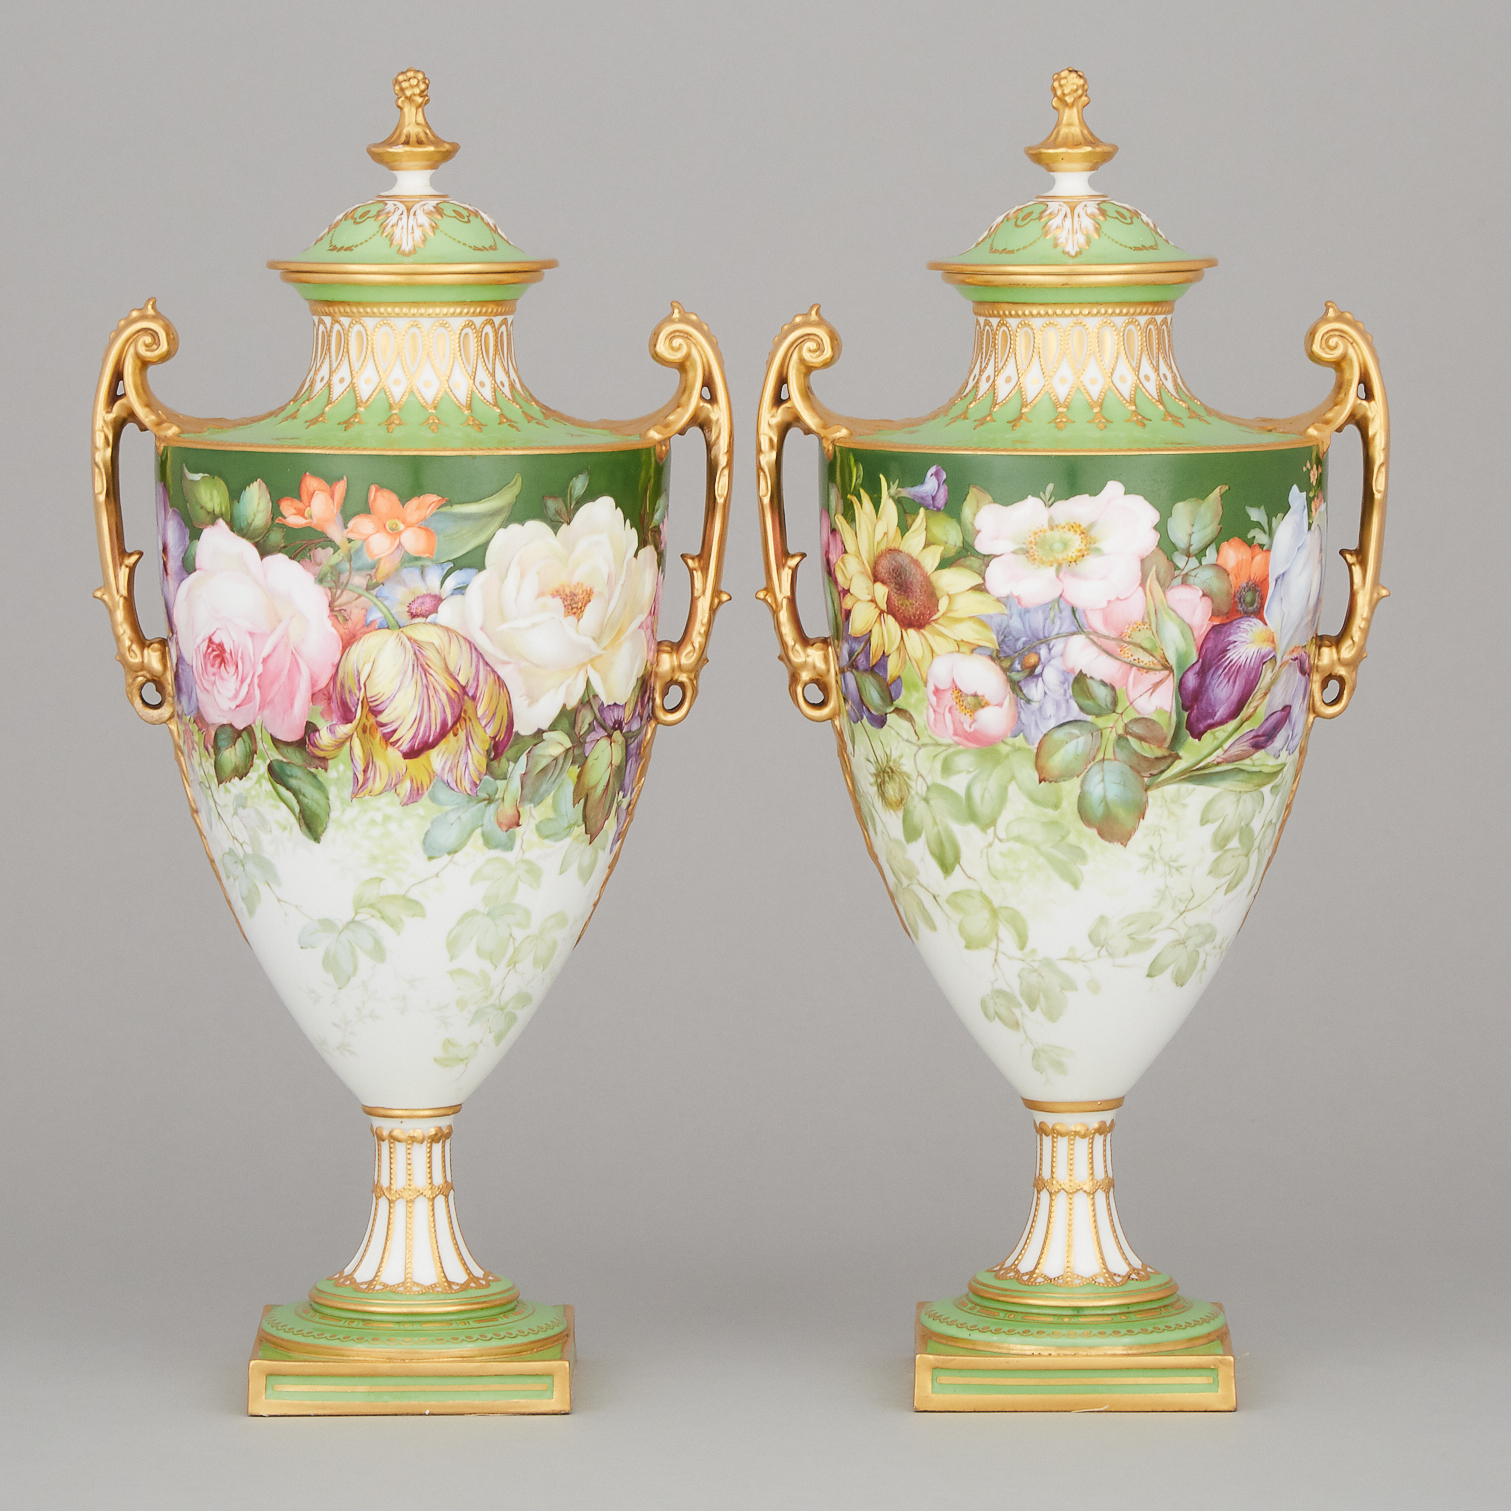 Pair of Royal Crown Derby Apple Green Ground Two-Handled Vases with Covers, Albert Gregory, 1906/08